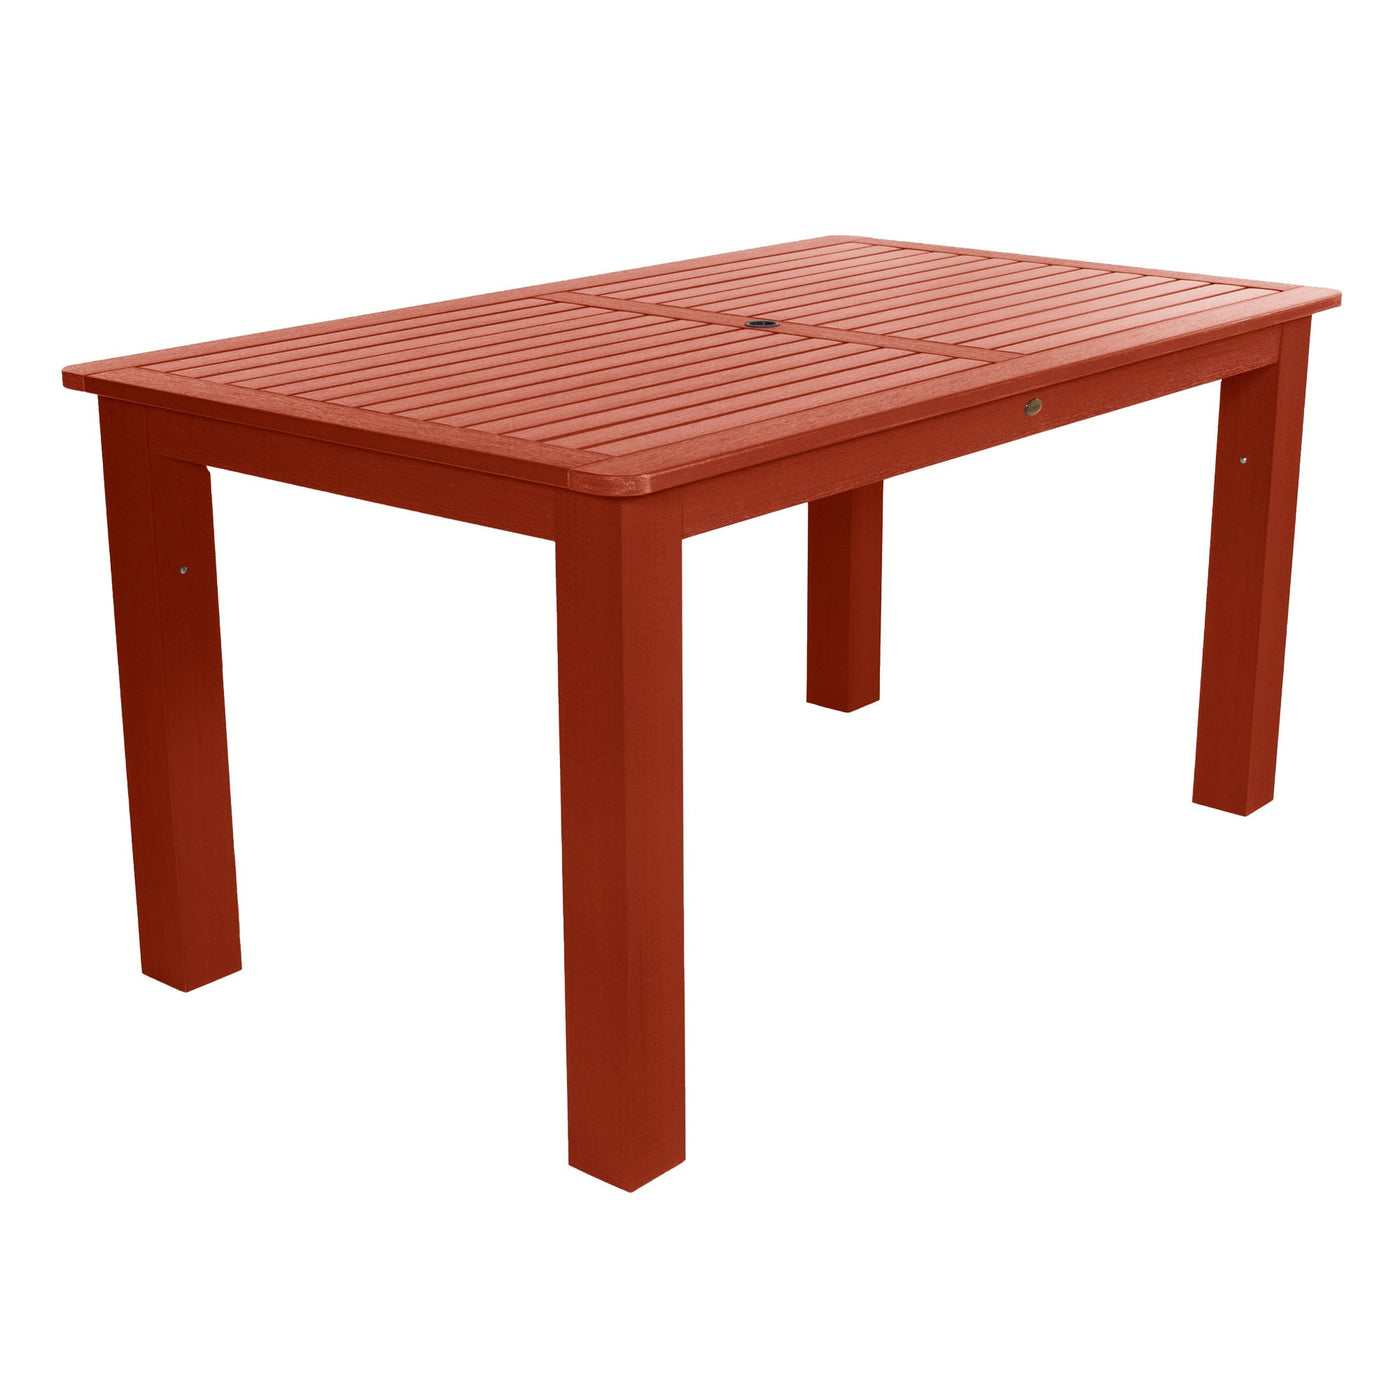 Rectangular 42in x 72in Outdoor Dining Table - Counter Height Dining Highwood USA Rustic Red 